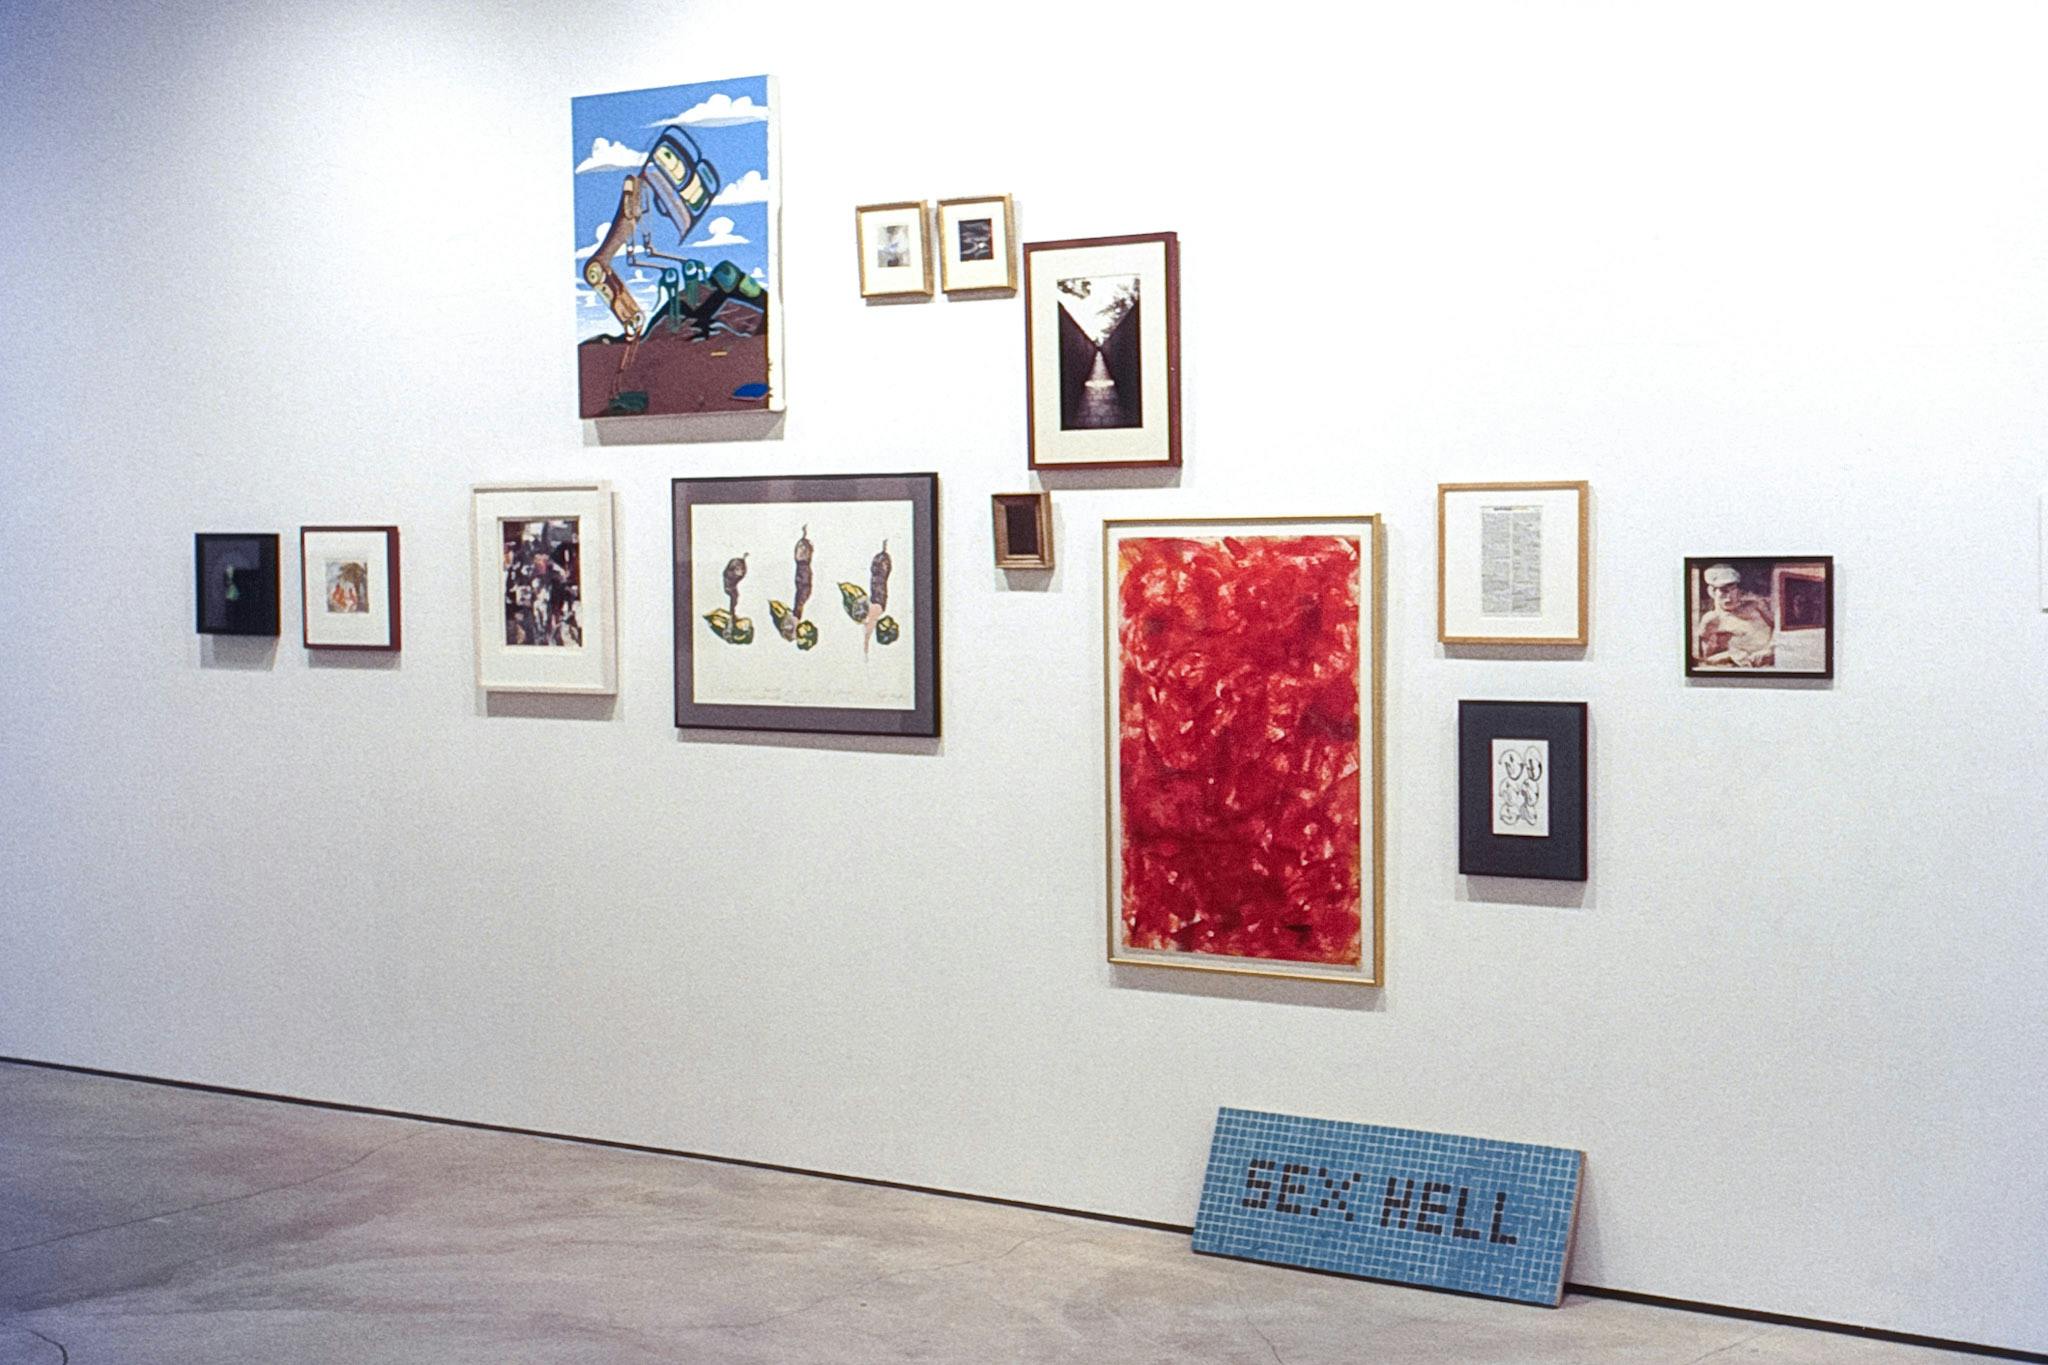 13  artworks are mounted on a white wall in a gallery, all but one are framed. At the base of the wall on the floor, there is a tile mosaic that reads "Sex Hell" in red letters on a blue background. 